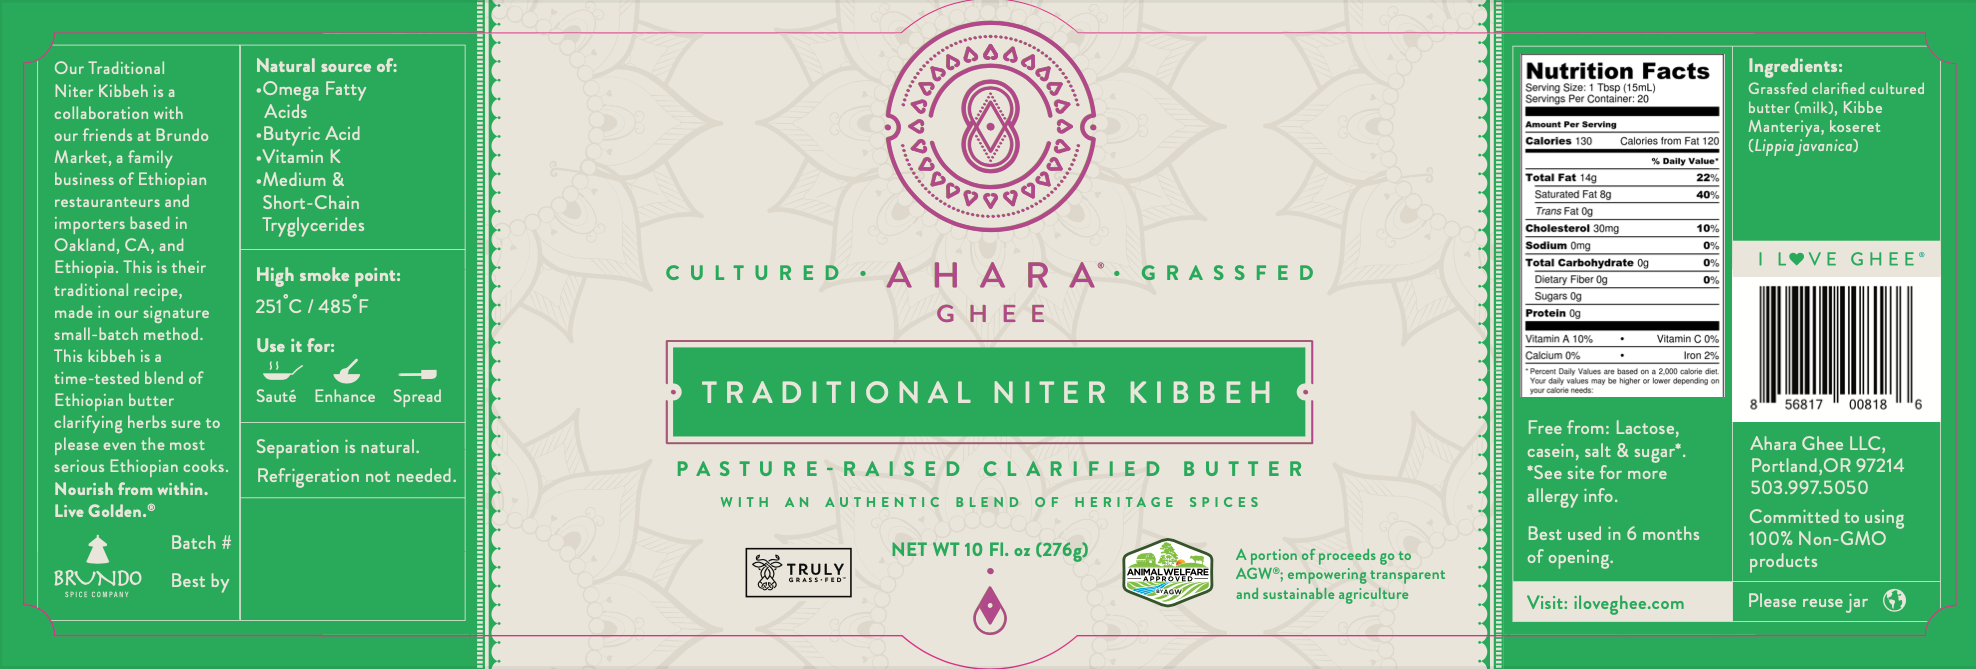 WHOLESALE CASE of 12: Traditional Niter Kibbeh